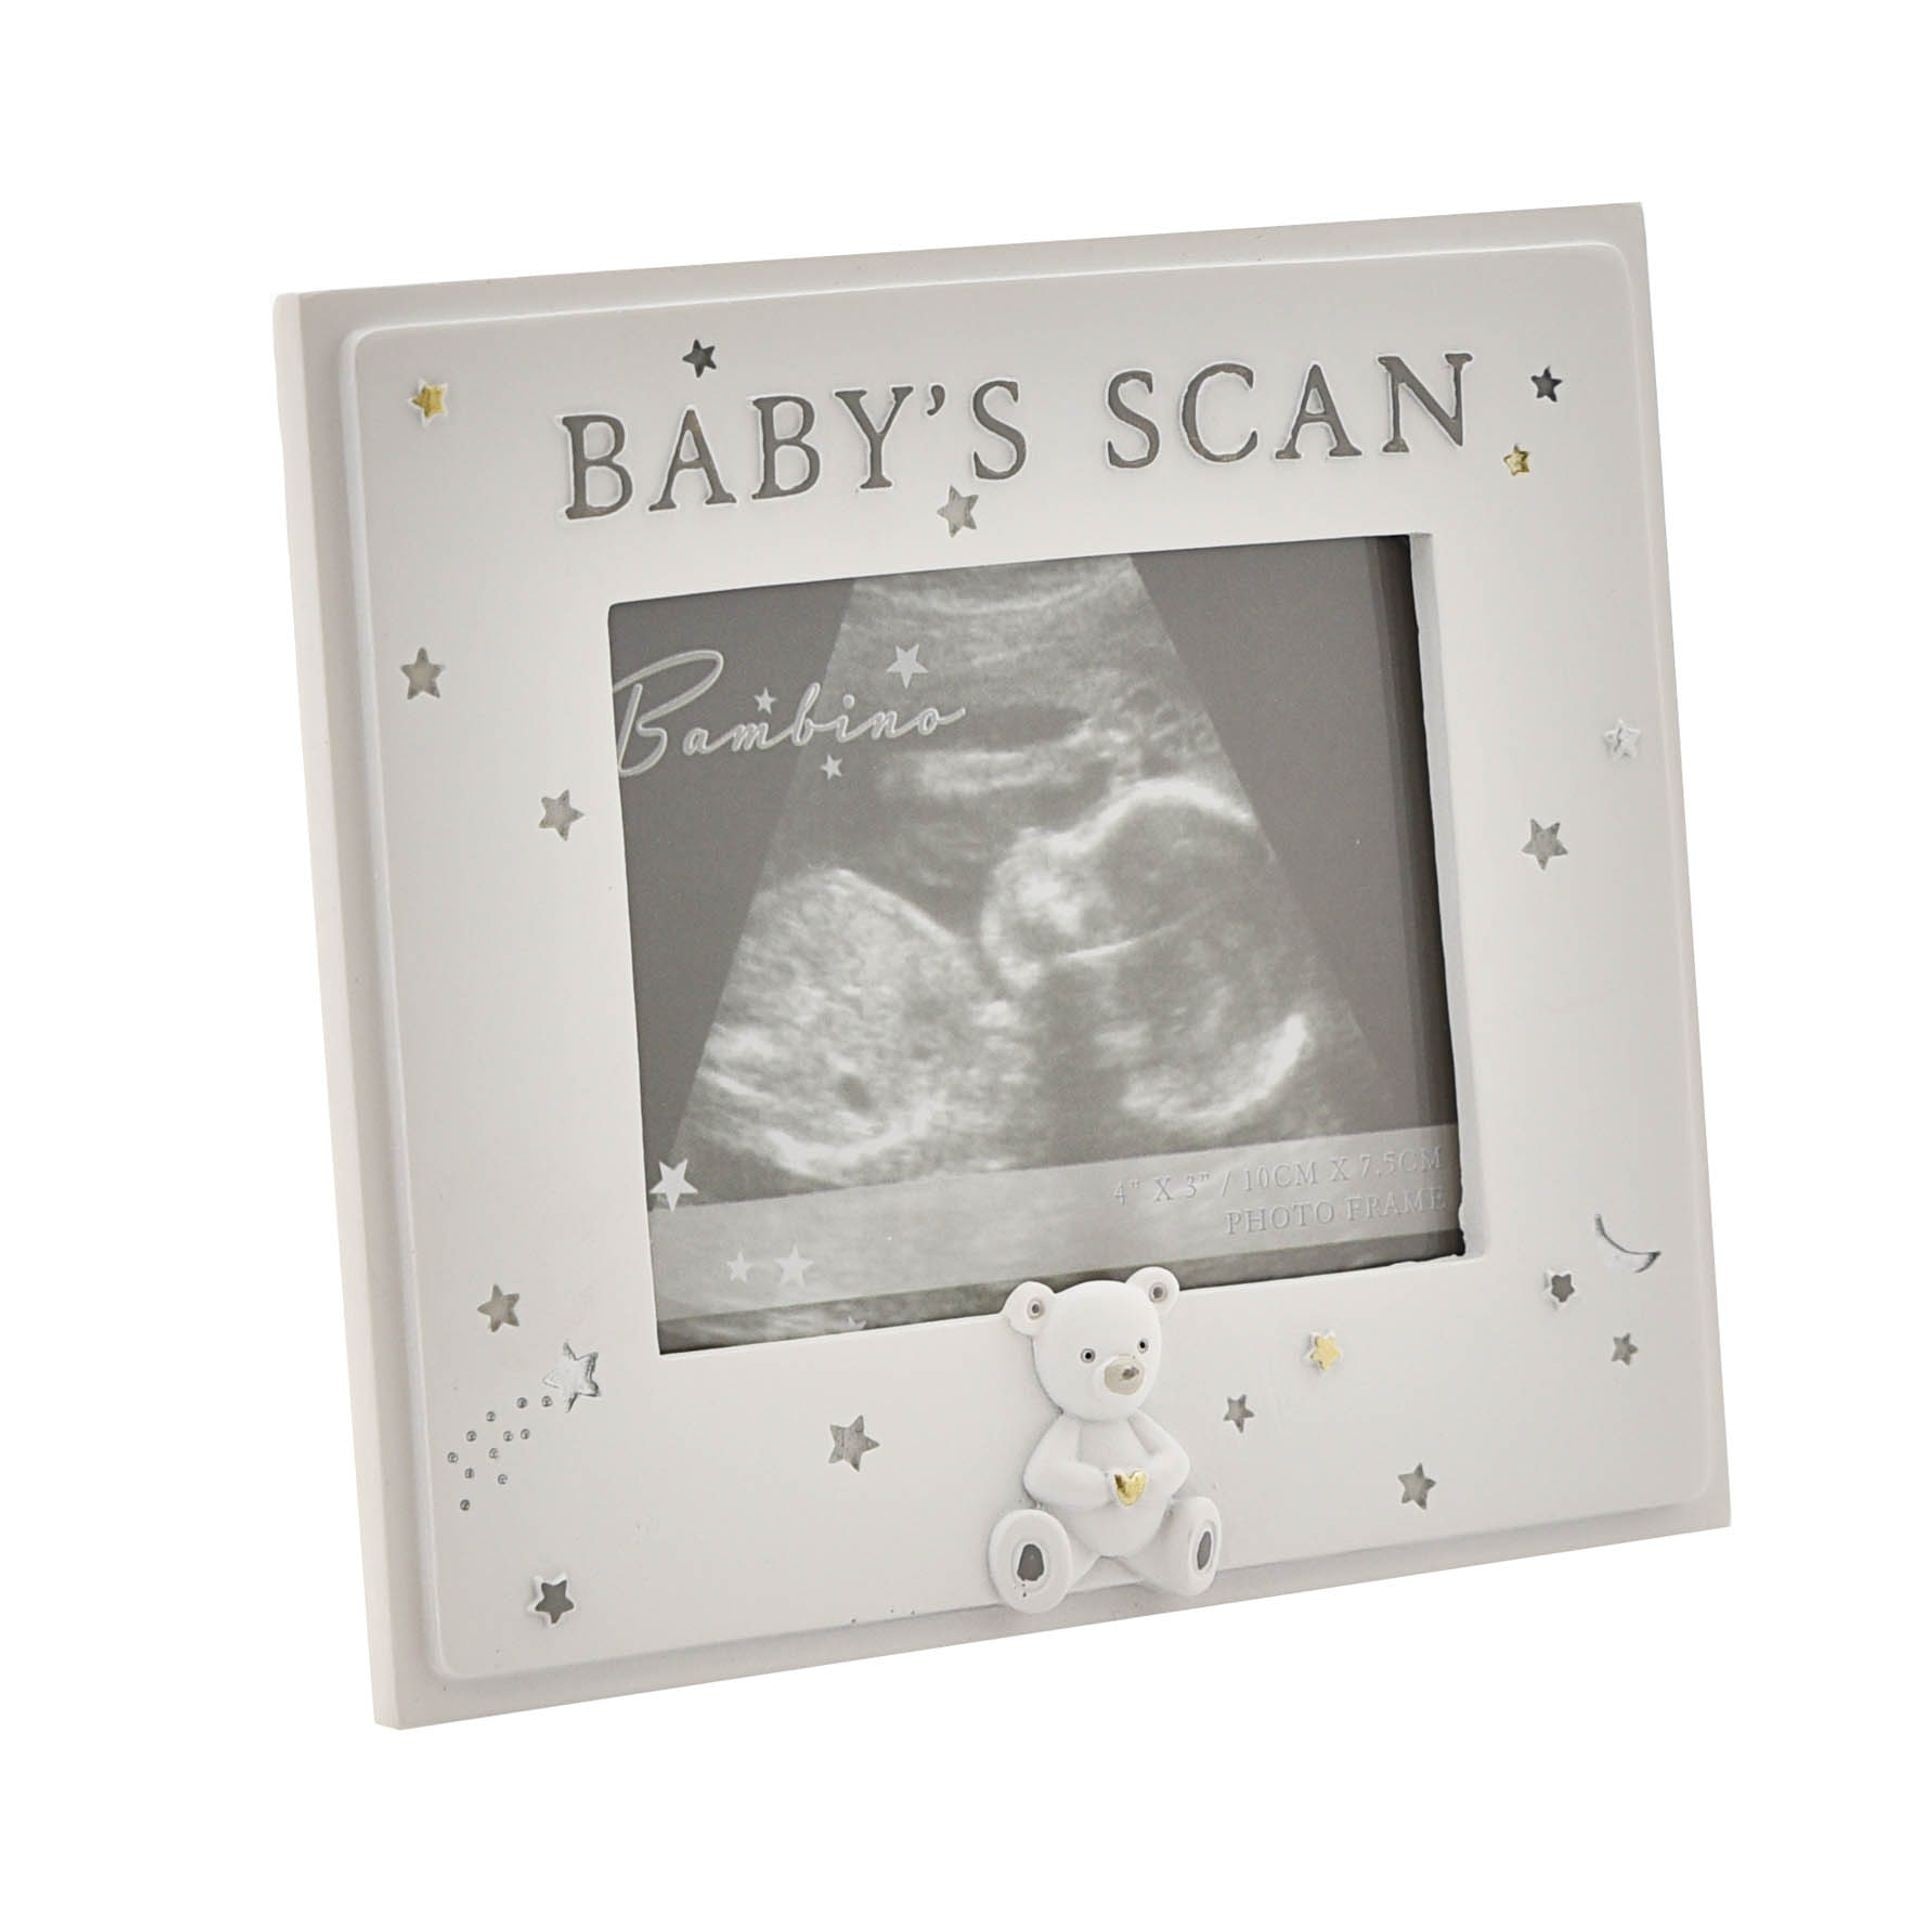 View Baby Scan Photo Frame 4 x 3 inch information